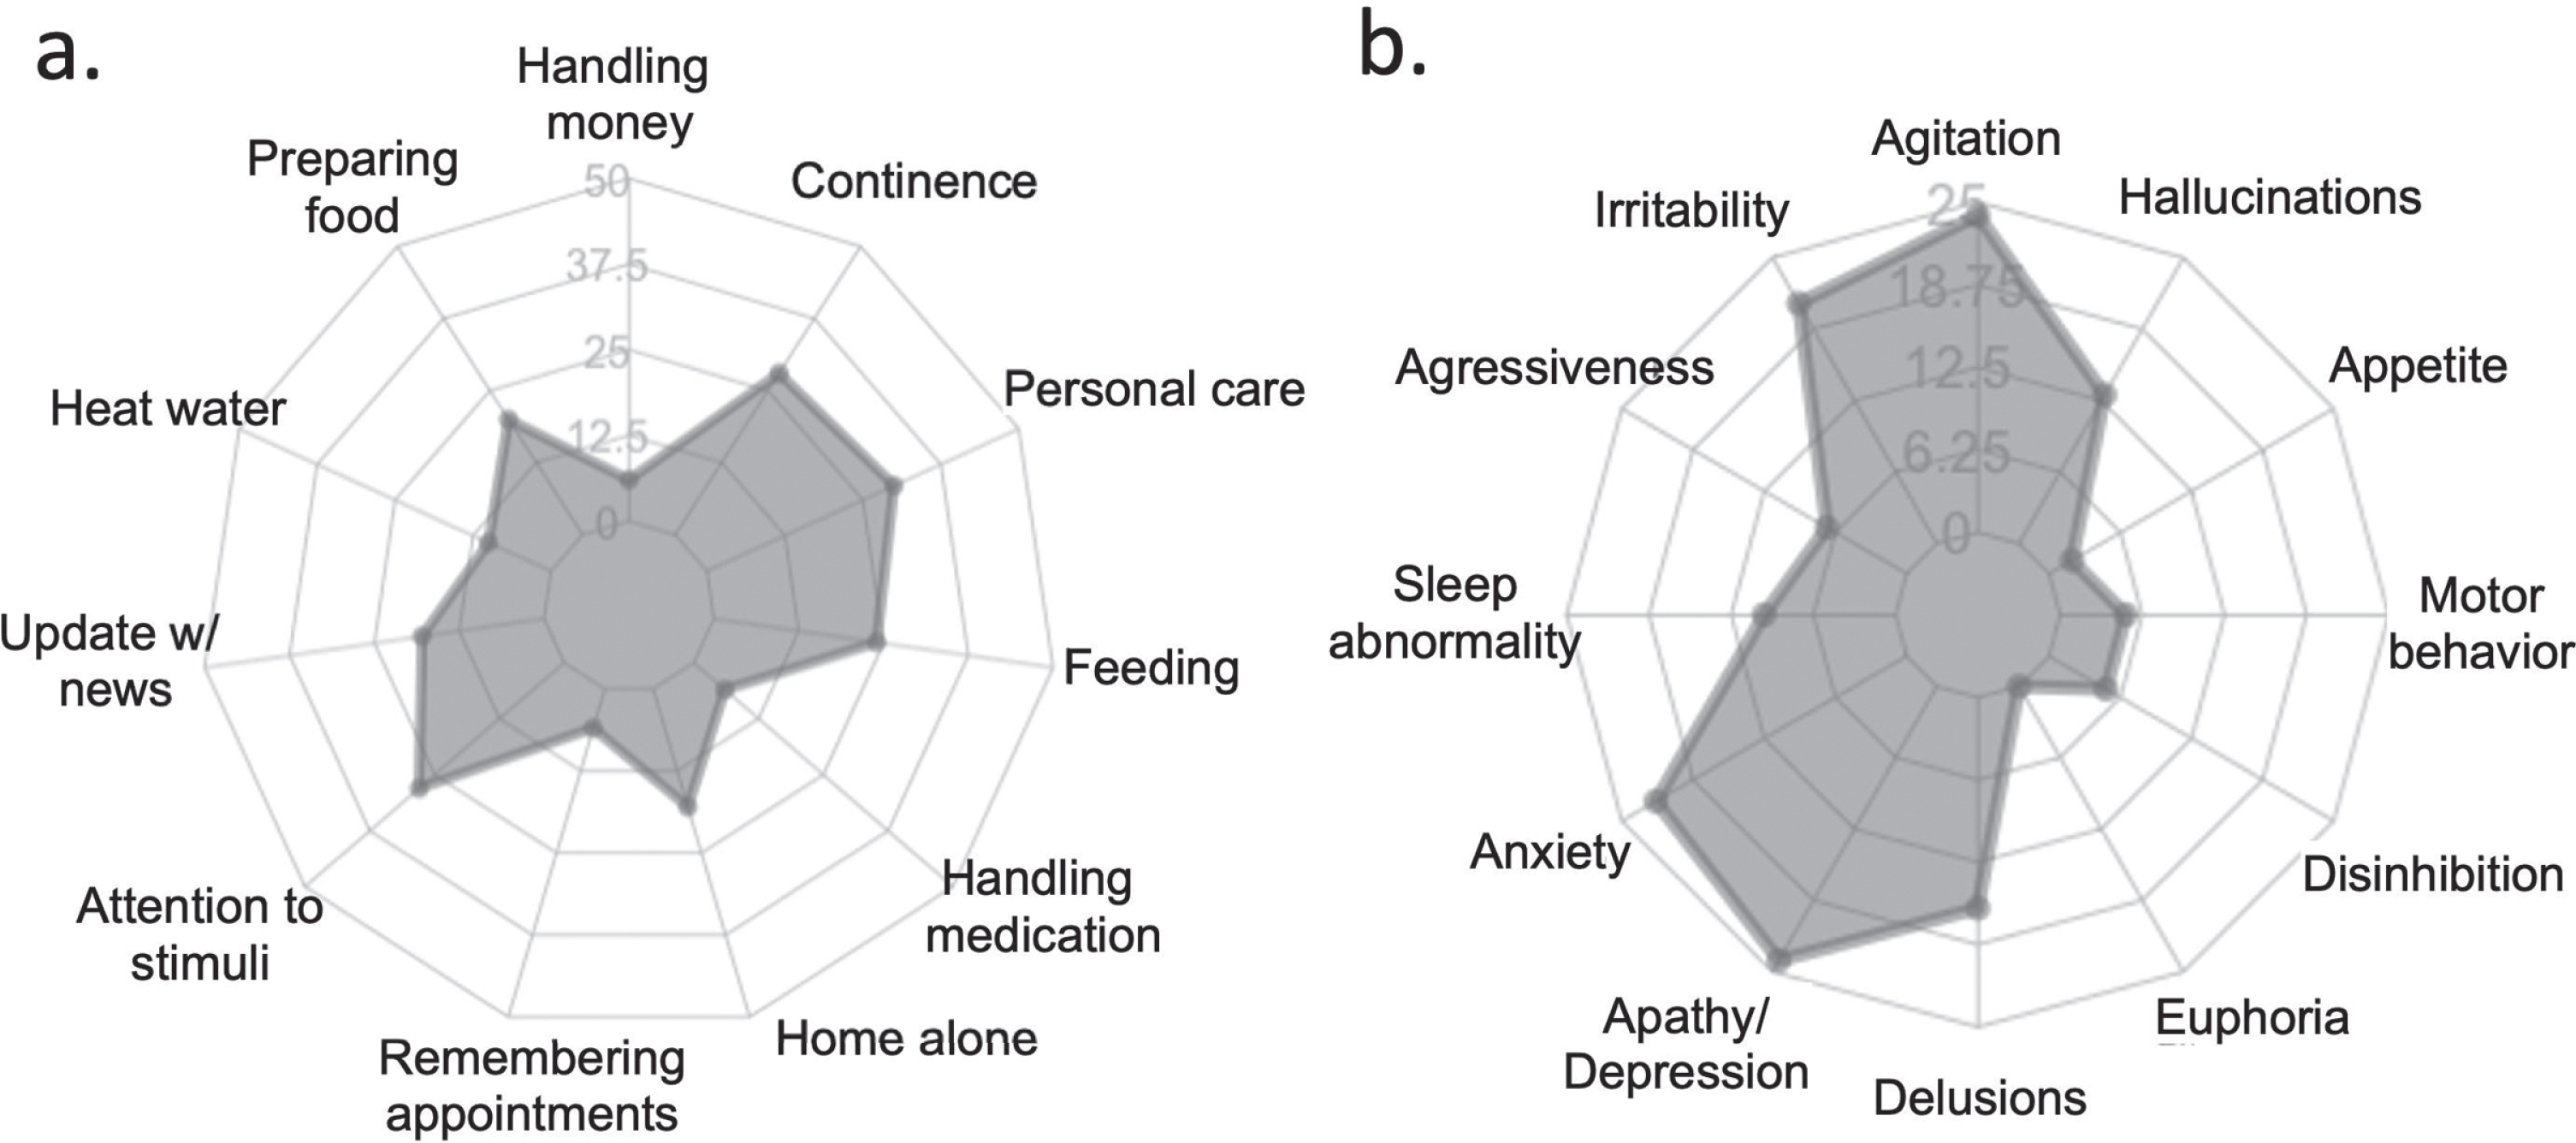 Frequency of (a) functional and (b) behavioral changes in patients with dementia during social isolation in caregivers’ viewpoint.